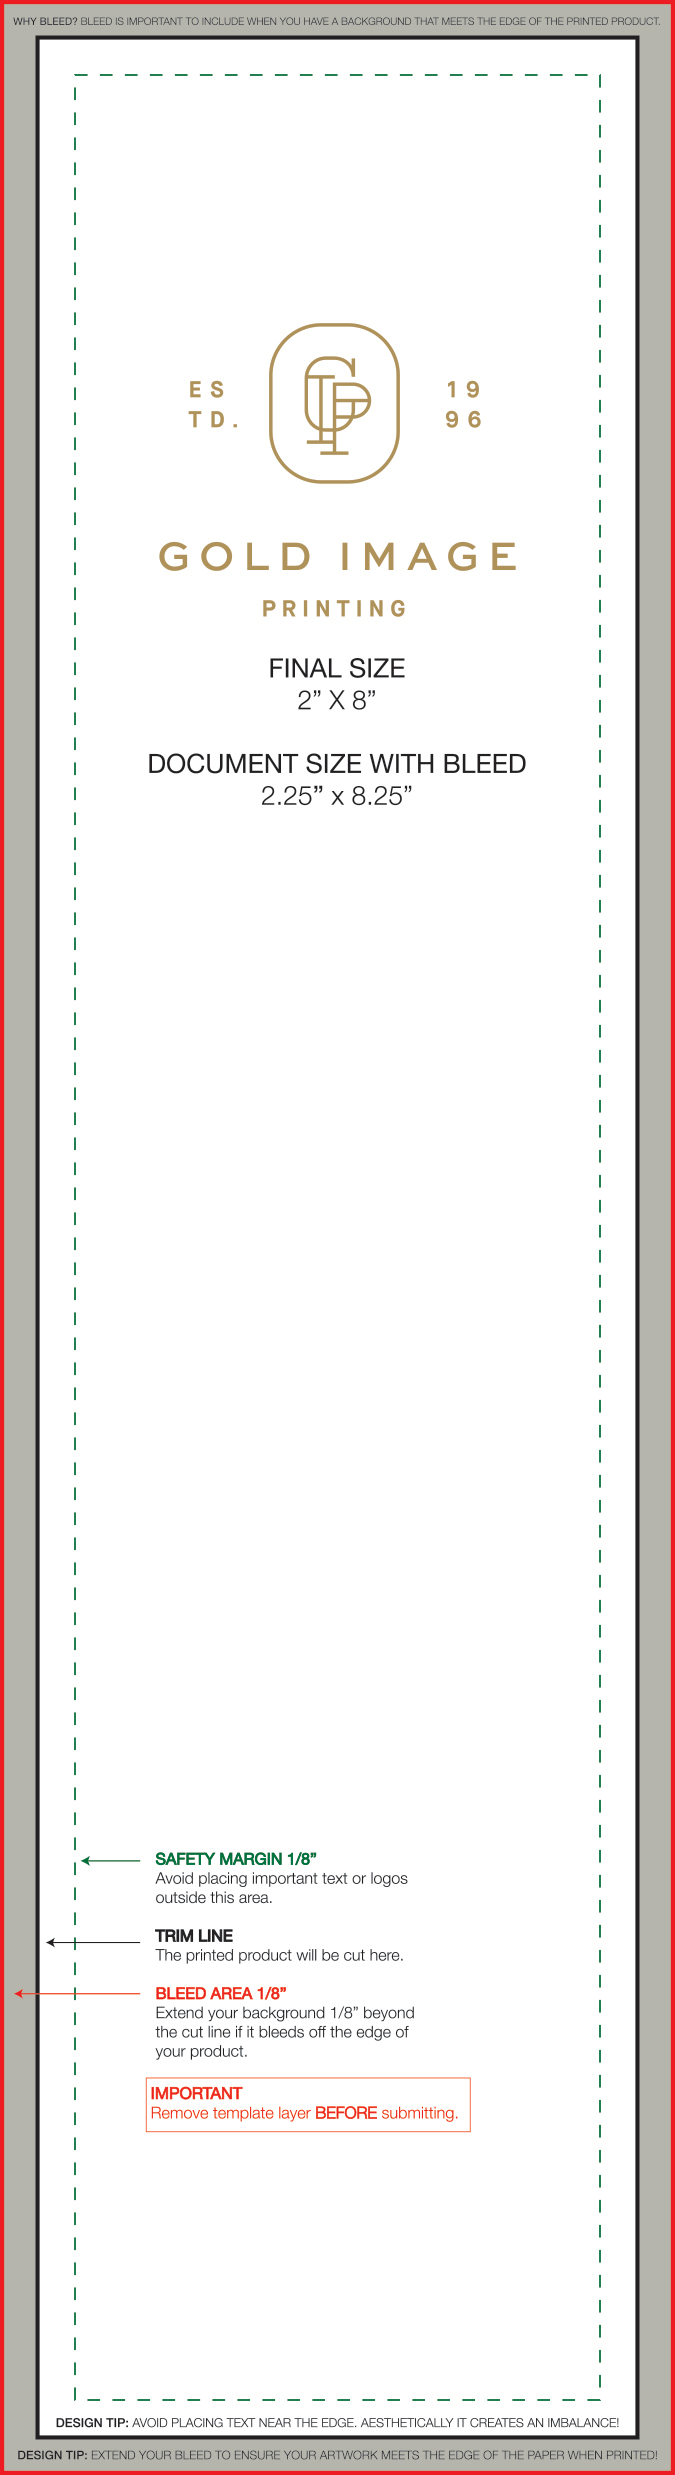 Standard Bookmark Size Template from services.goldimageprinting.com